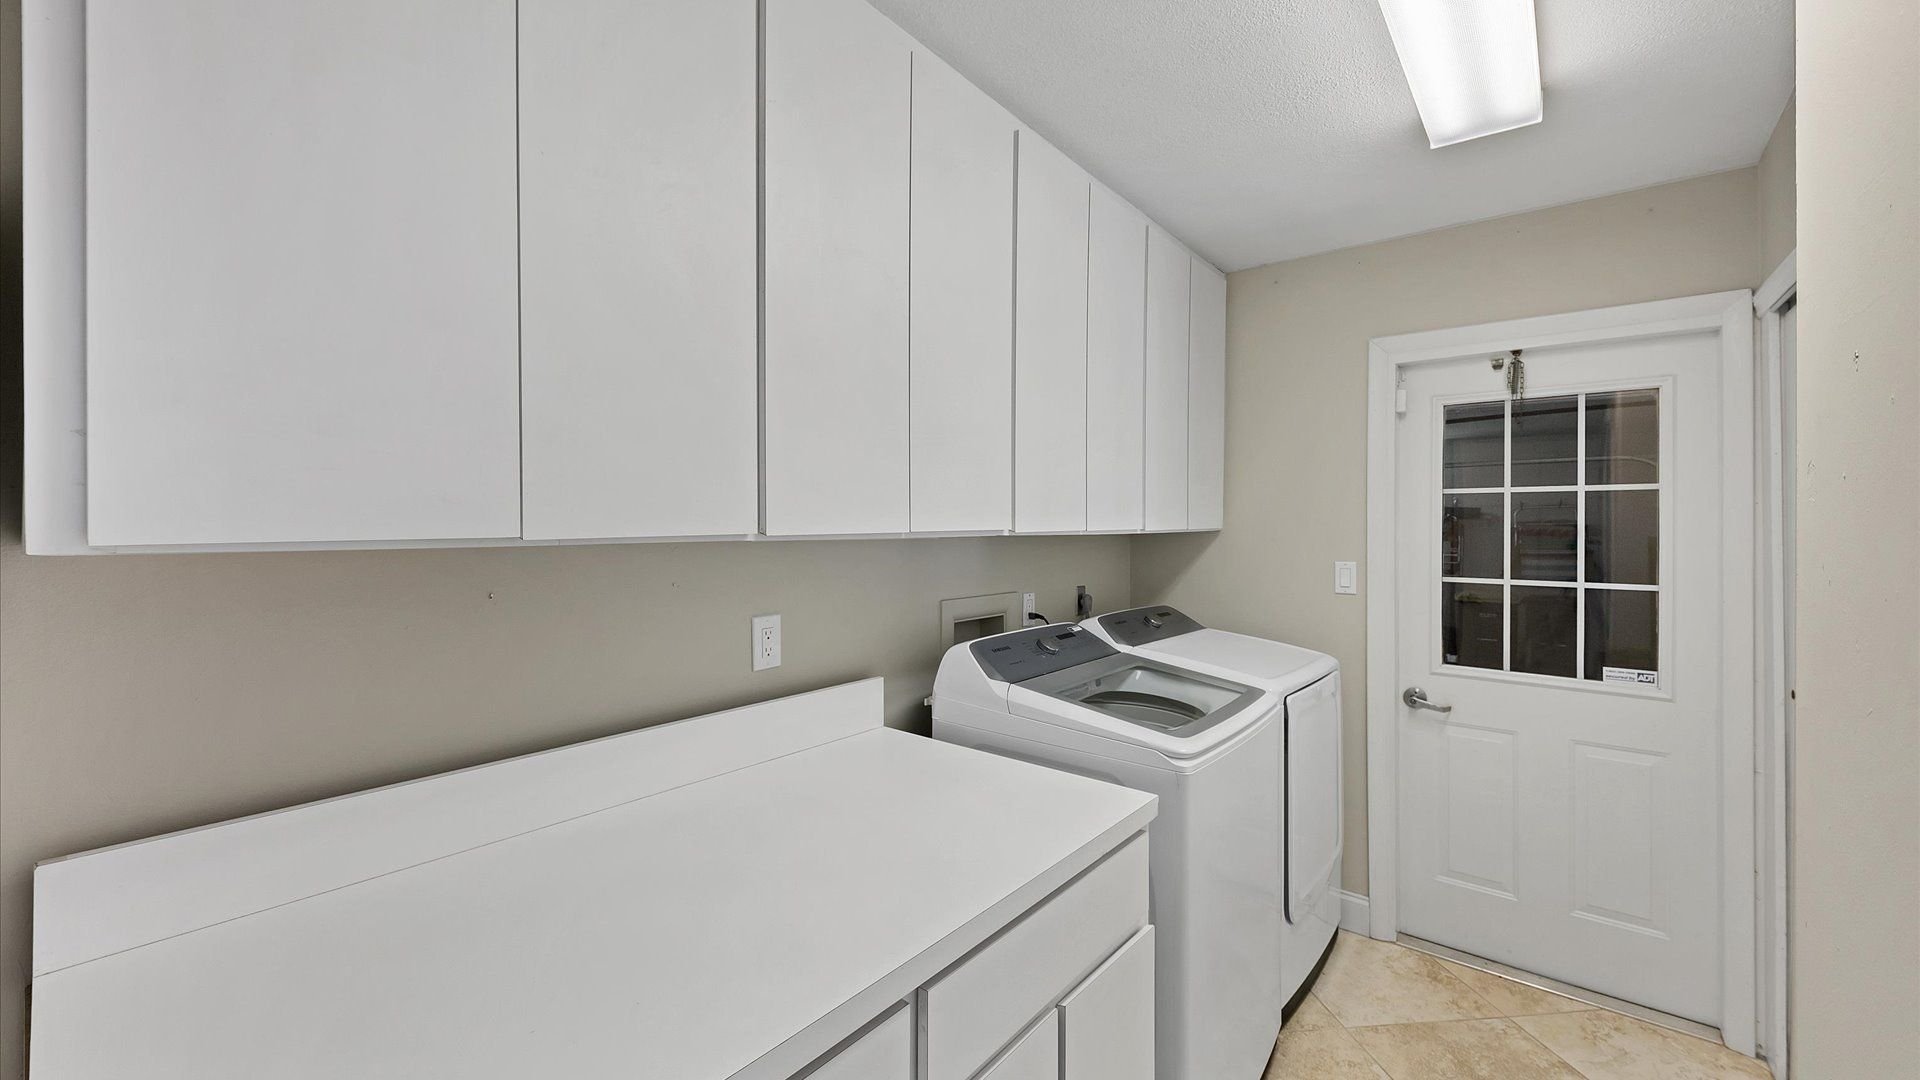 Washer and dryer in laundry room with garage access